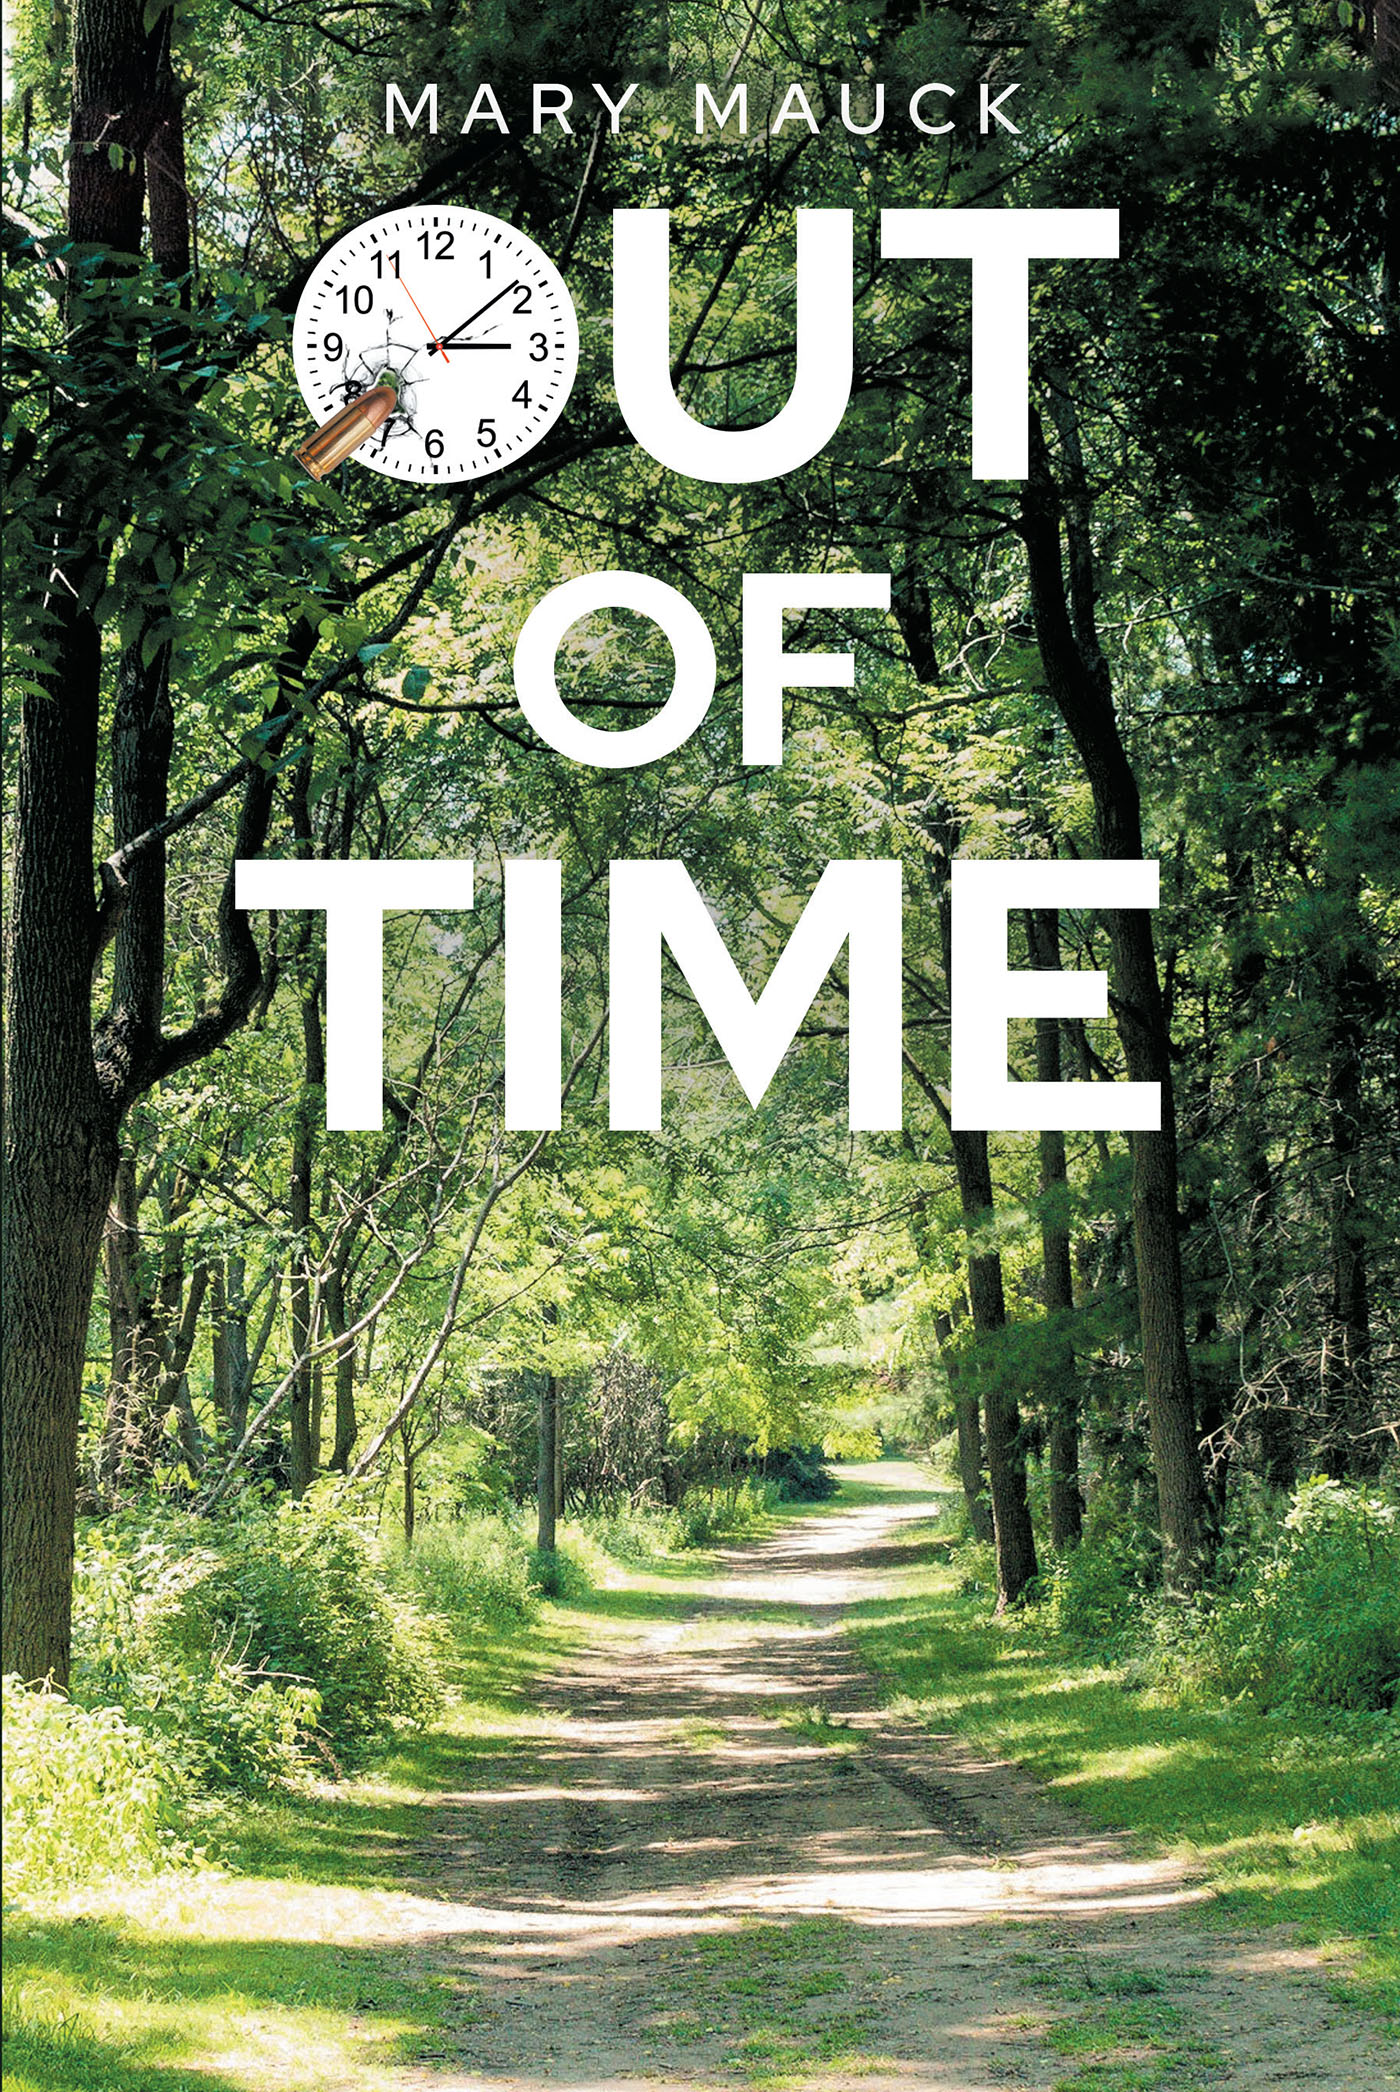 Author Mary Mauck’s New Book, "Out of Time," Follows a Wife and Mother Whose Life is Put in Grave Danger After She Witnesses a Double Murder While Out Hiking